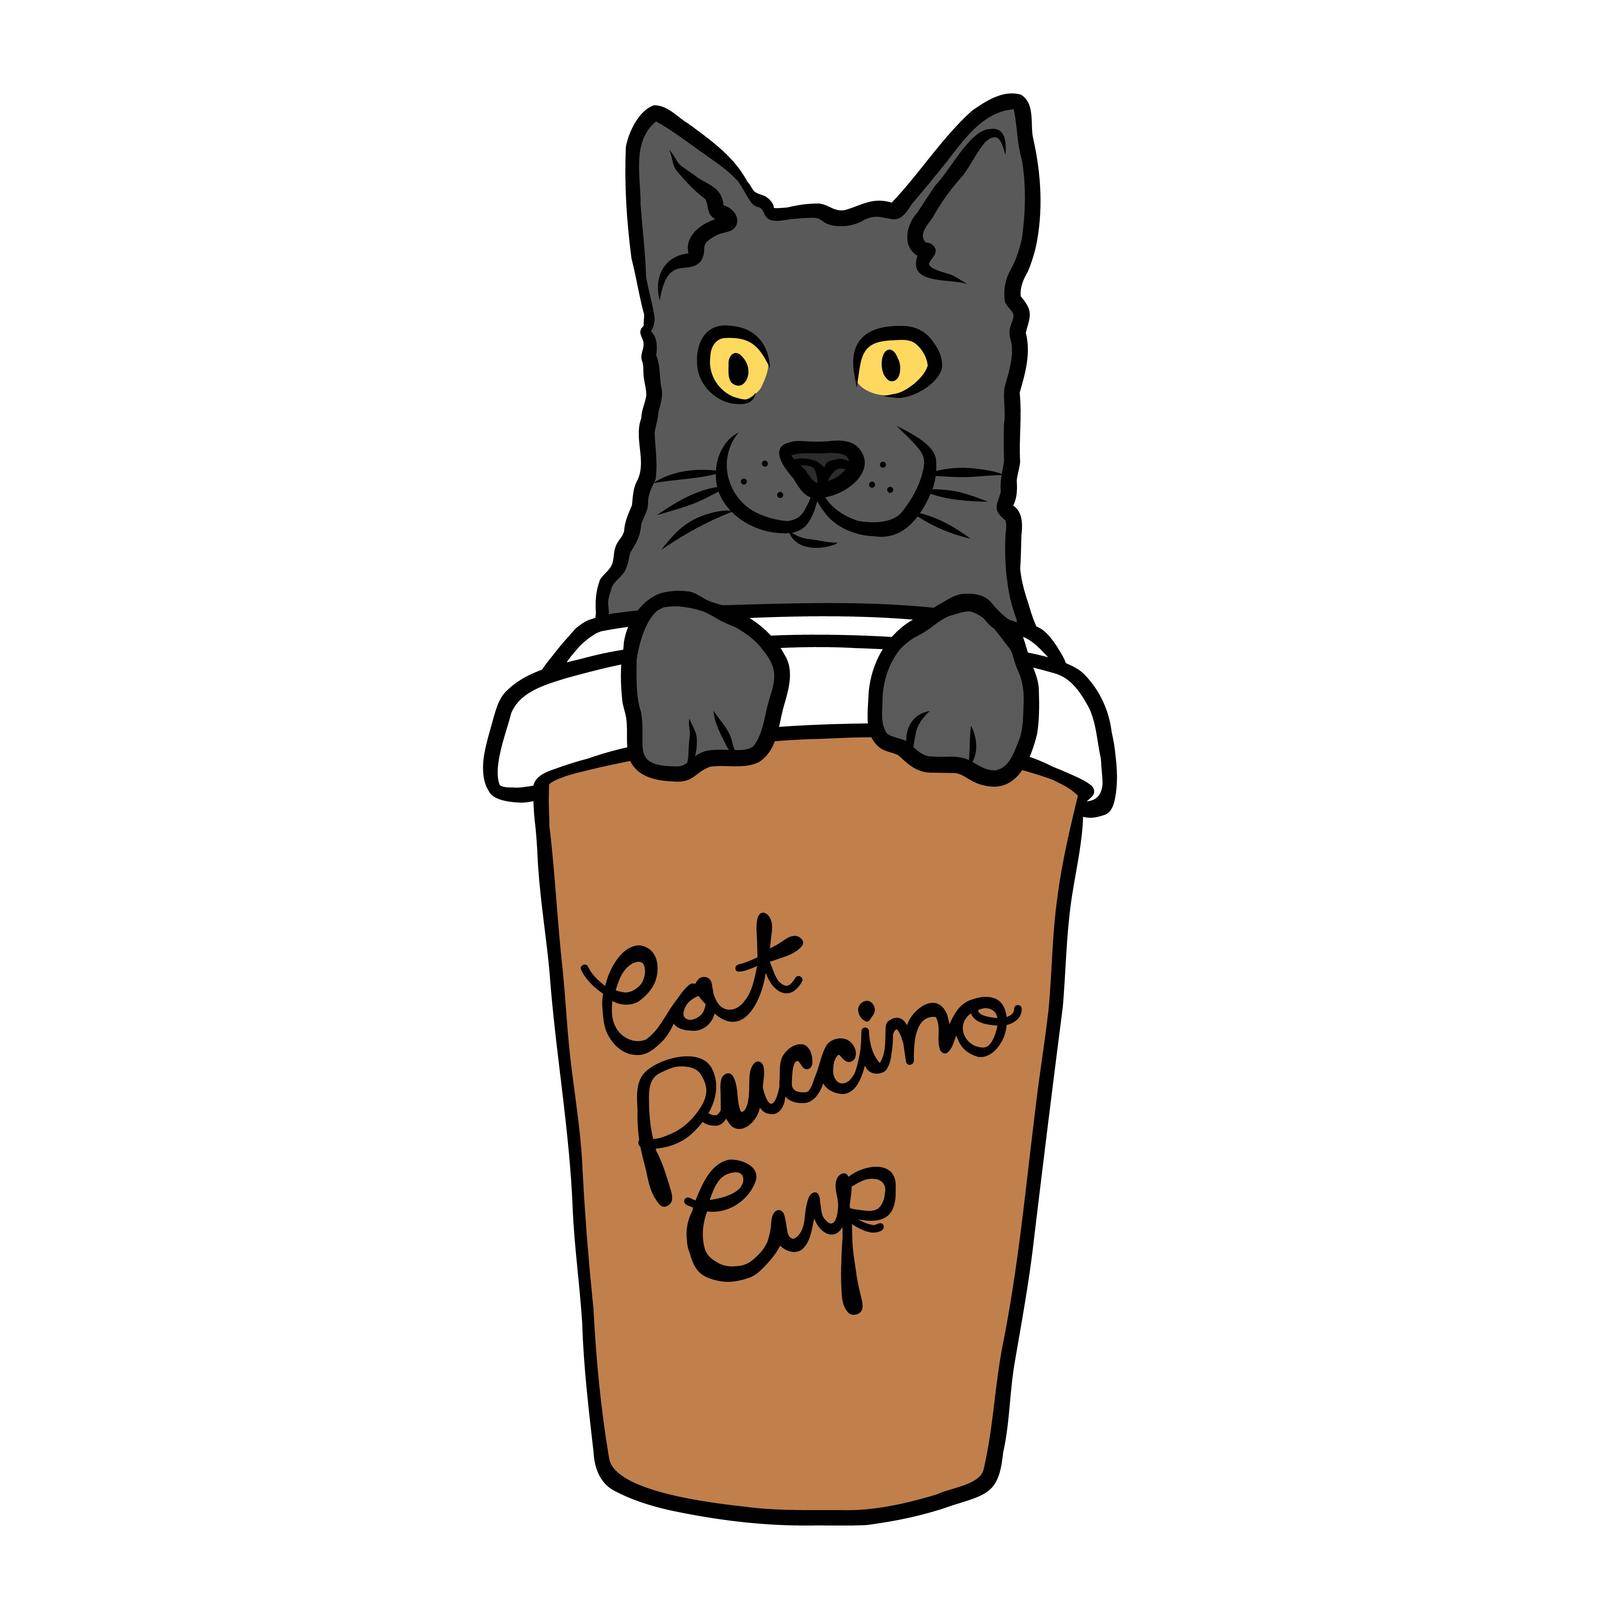 Catpuccino, cat in coffee cup cartoon vector illustration by Yoopho